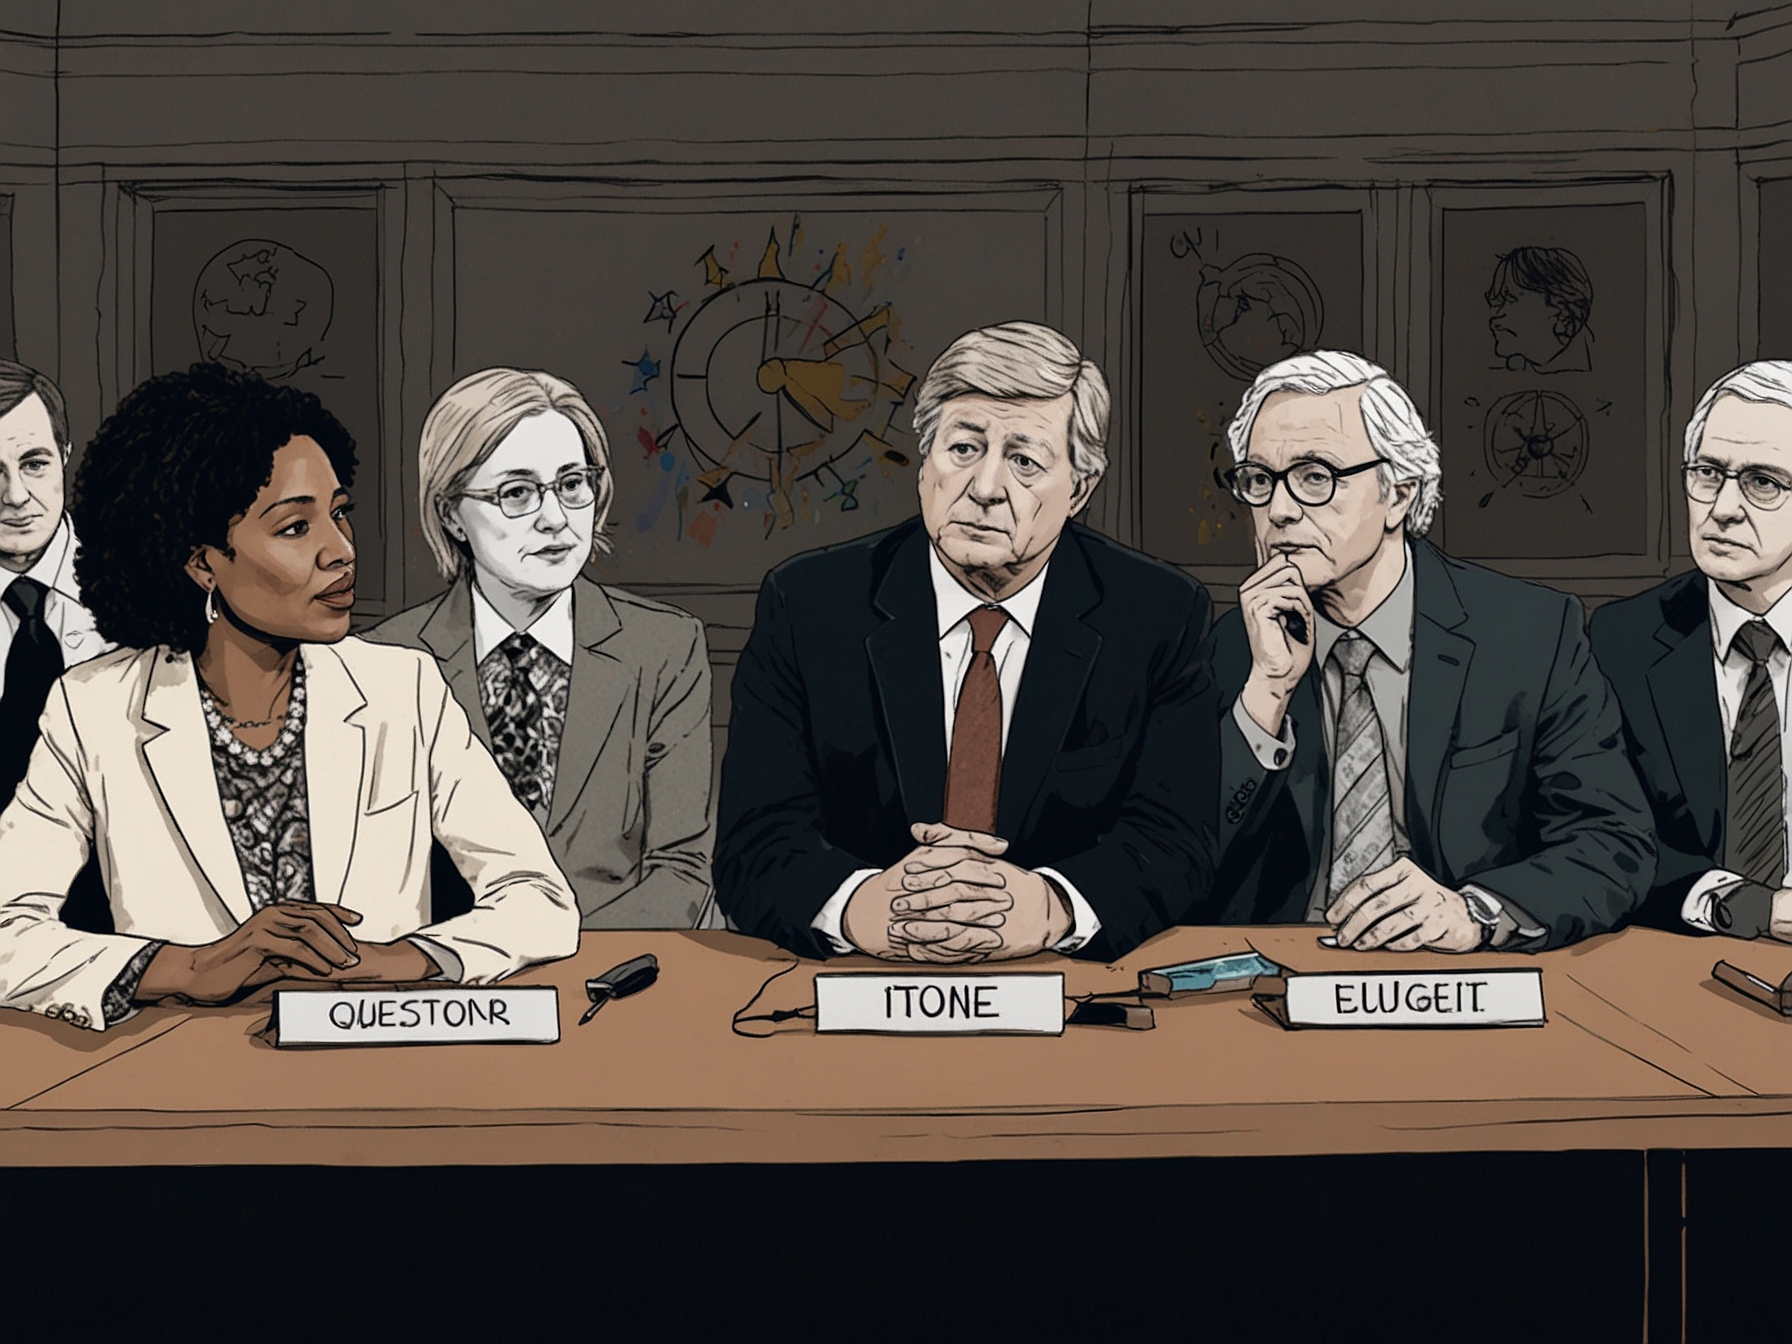 A split-screen of the Question Time panel, featuring diverse participants including politicians and experts, engaged in a heated discussion about the UK's stance on the European Convention on Human Rights and national security.